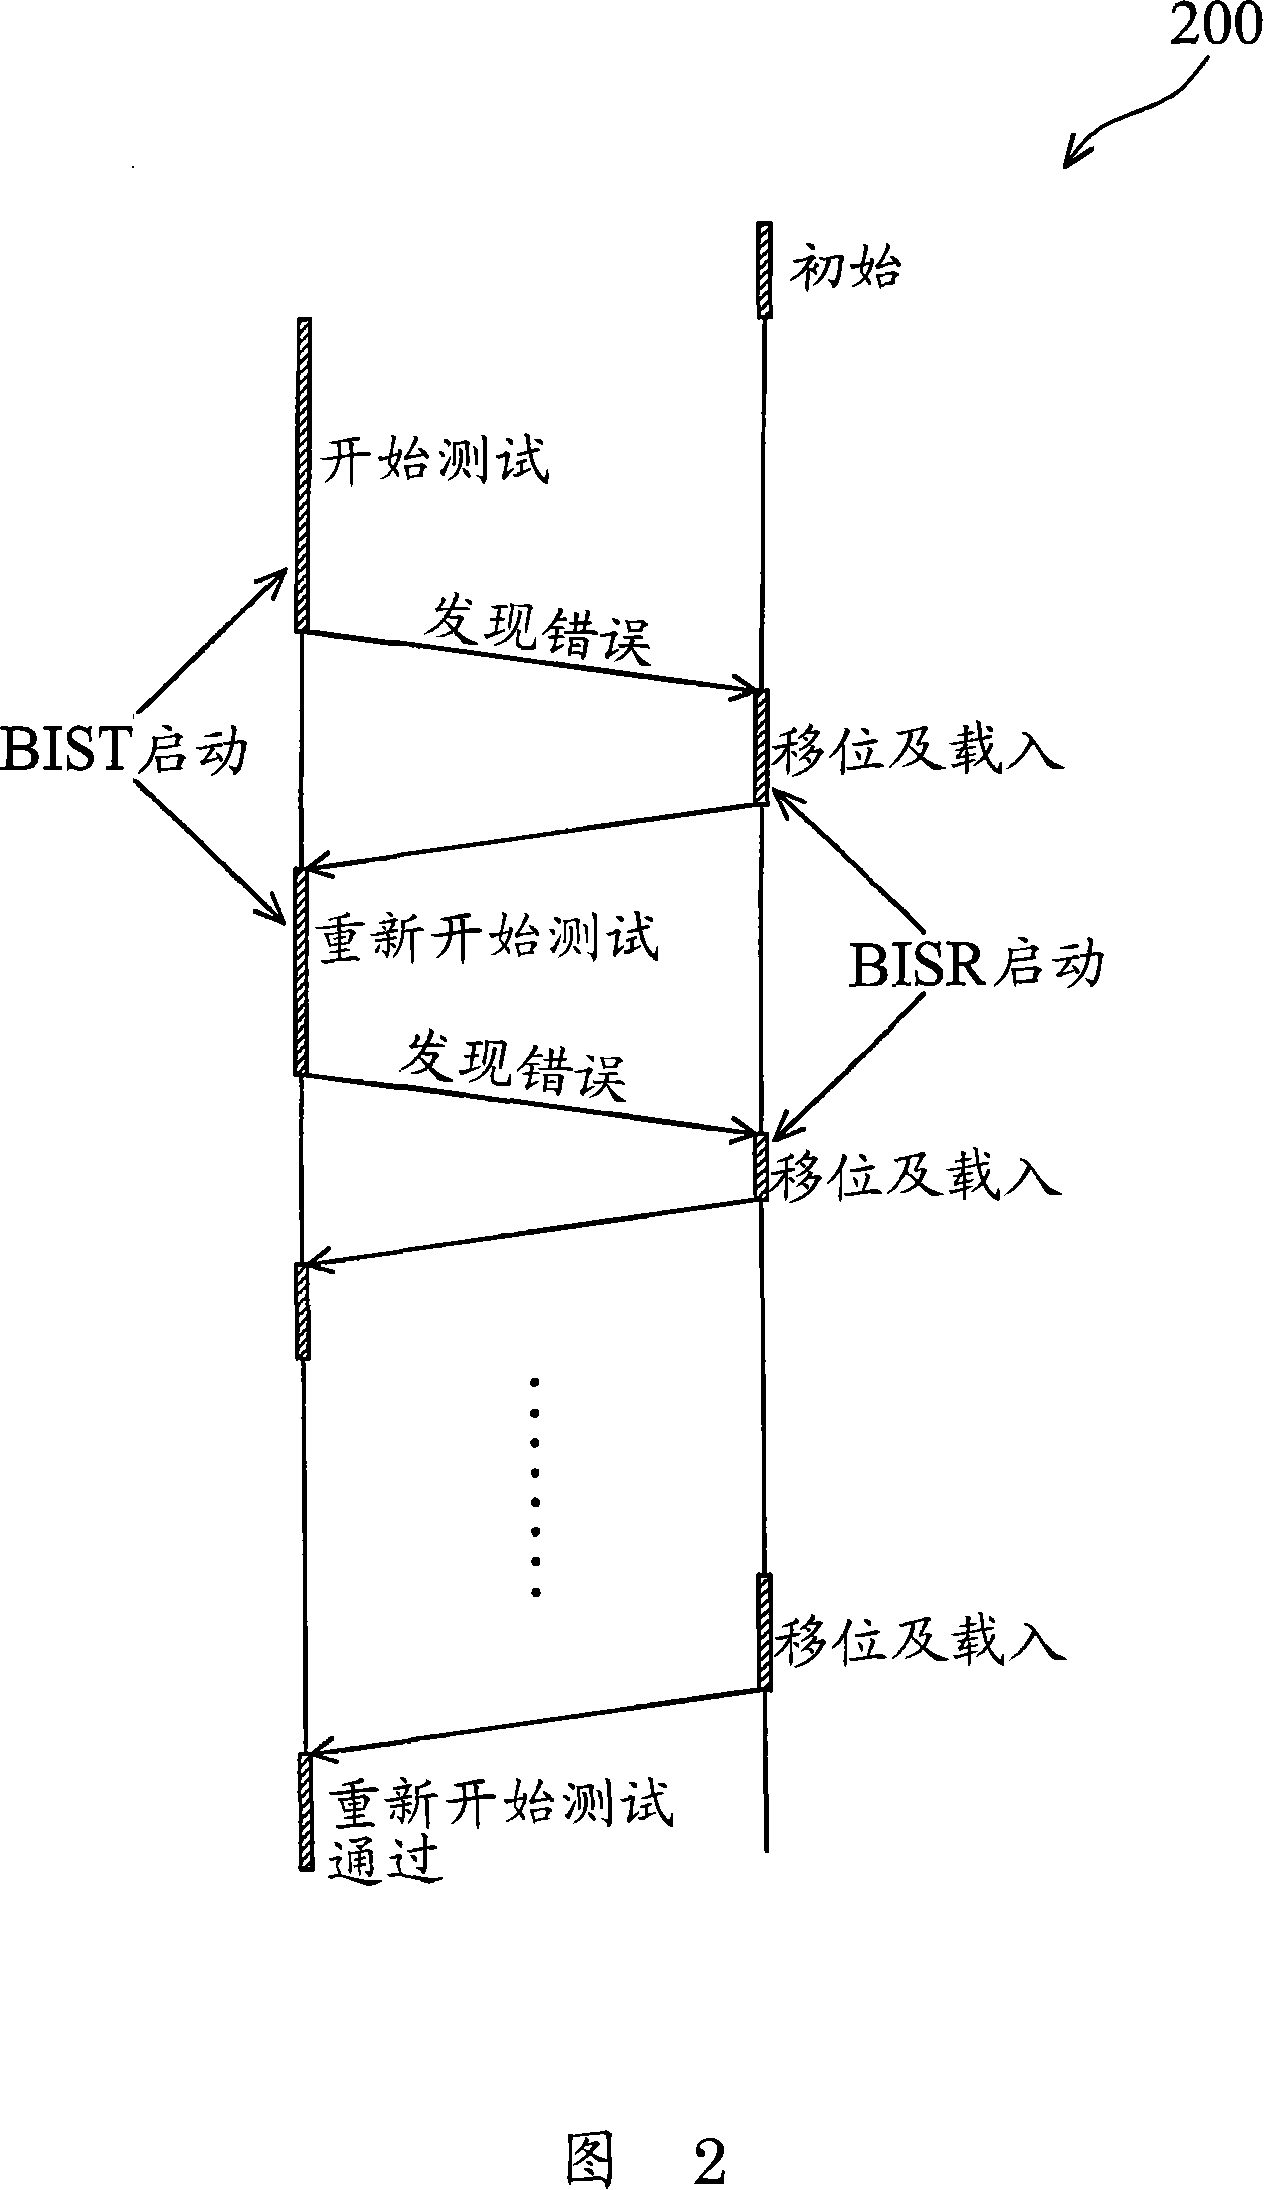 Method and system for improving reliability of memory device